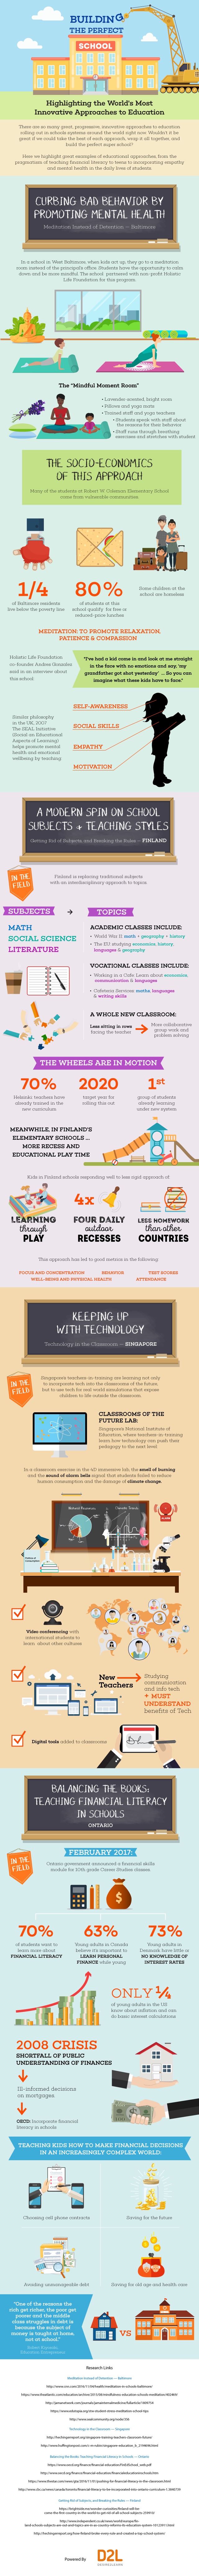 Building the Perfect School Infographic